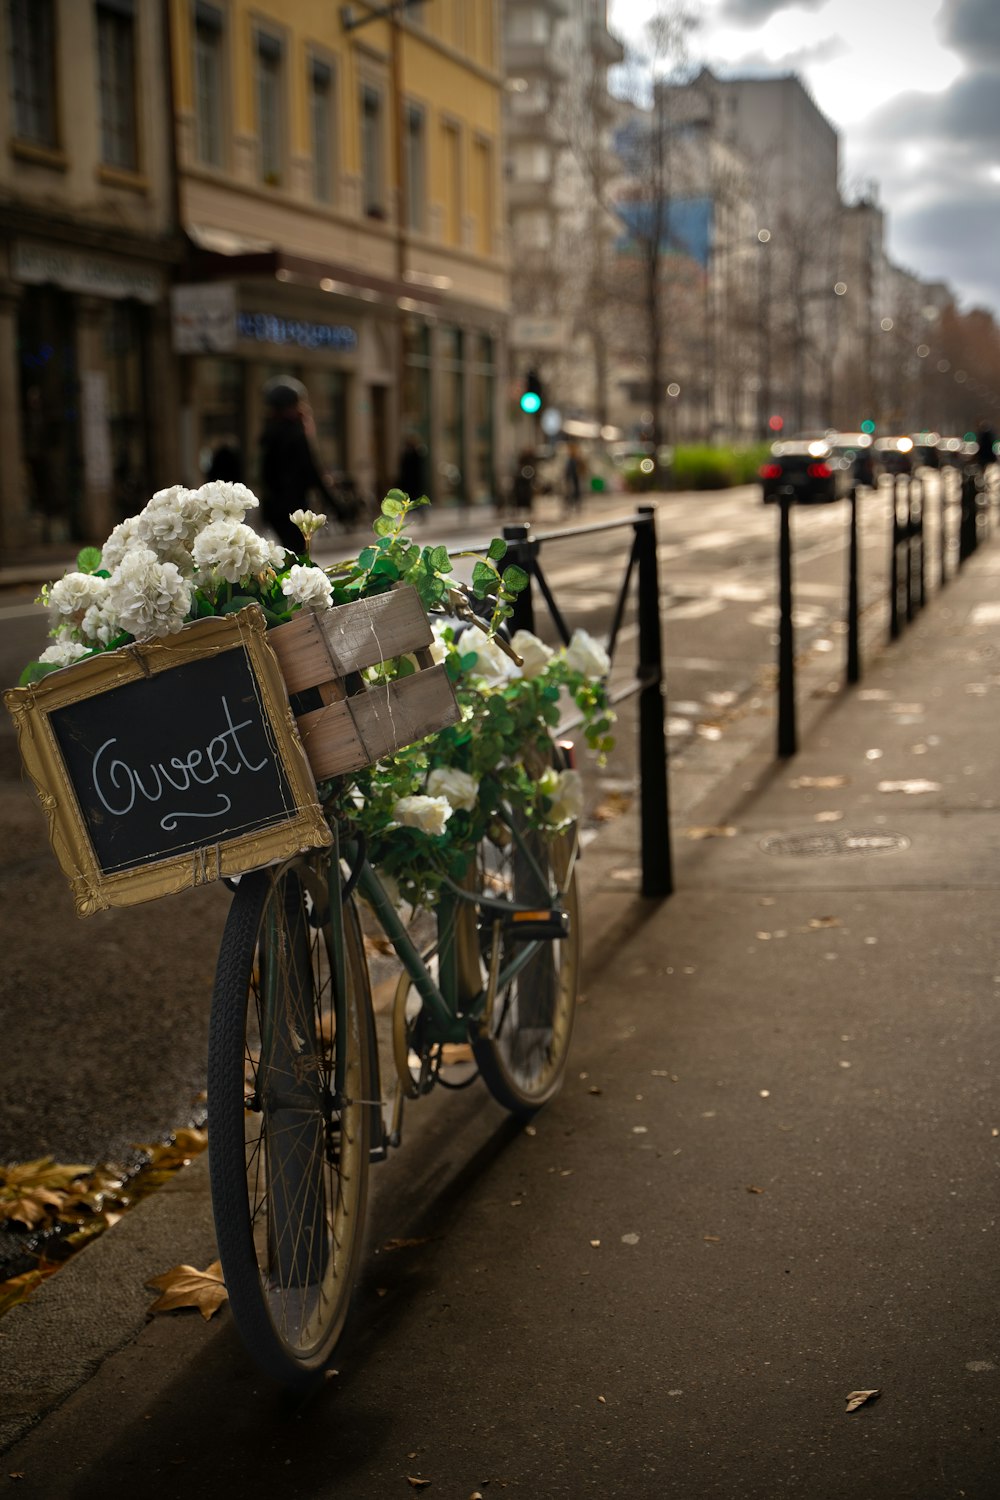 a bicycle with a basket full of flowers parked on the side of the street